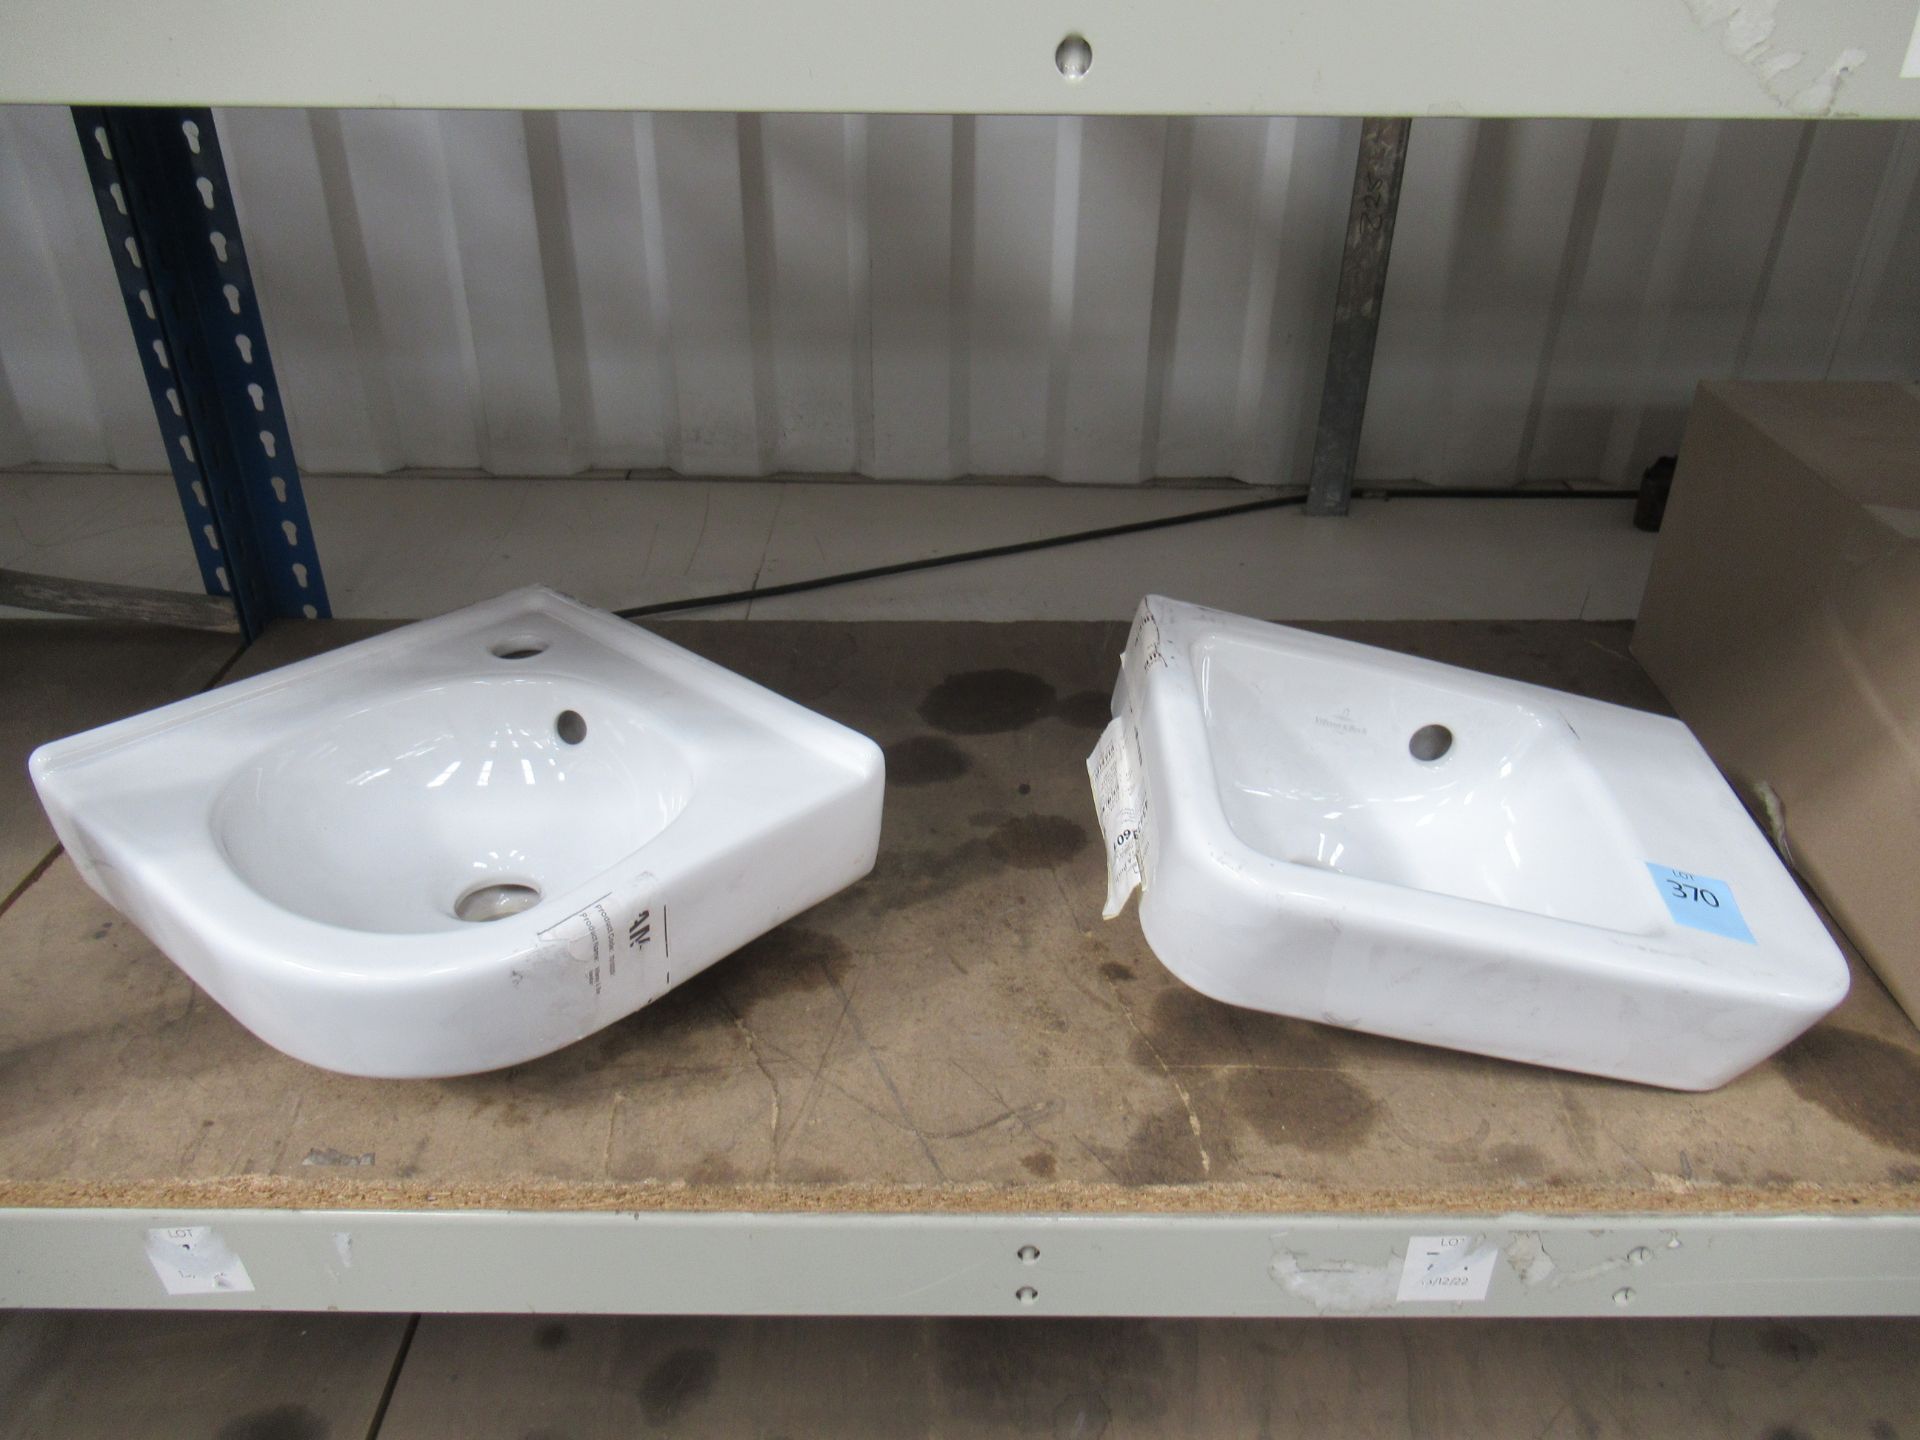 2 x Villeroy and Boch Small Sinks